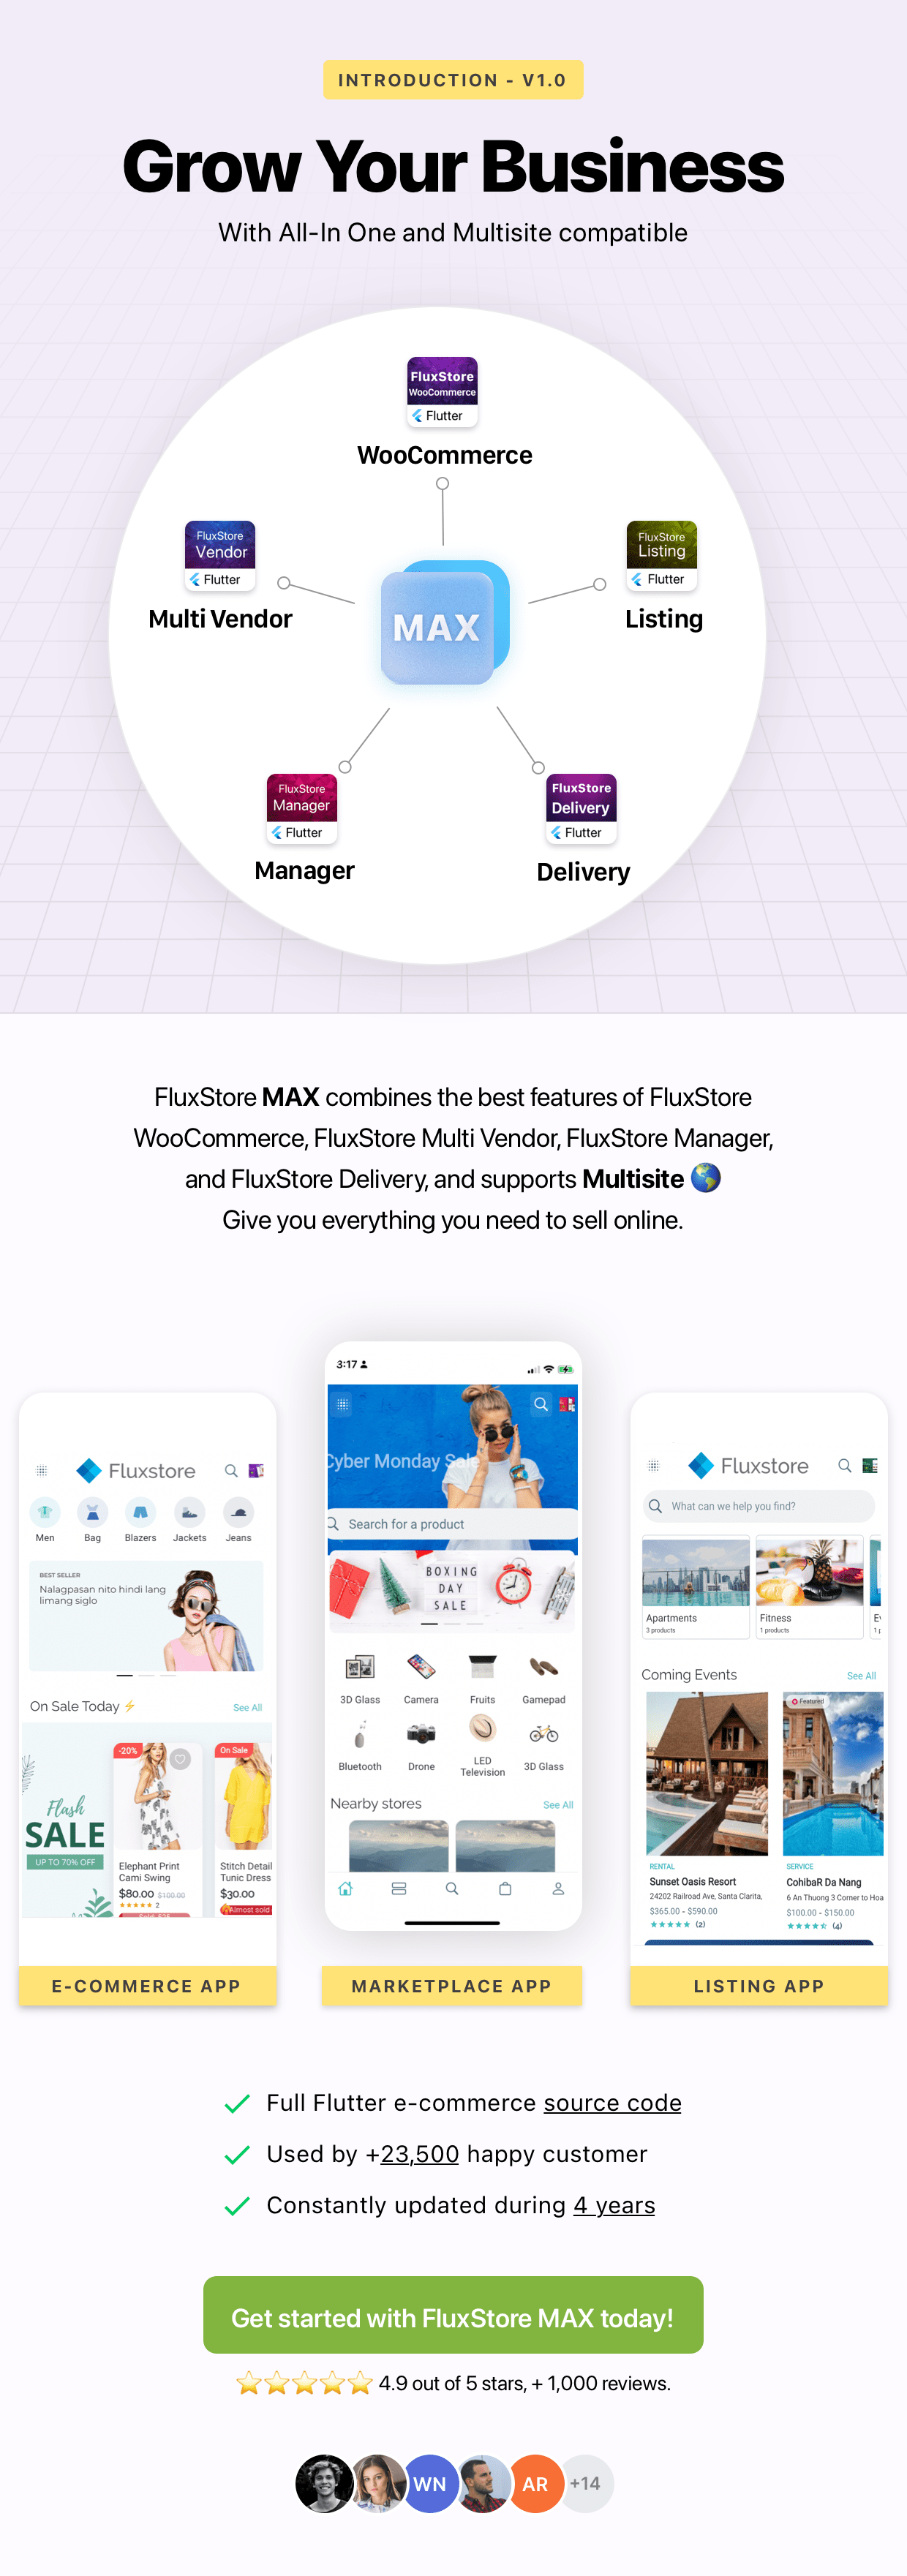 FluxStore MAX - The All-in-One and Multisite E-Commerce Flutter App for Businesses of All Sizes - 1